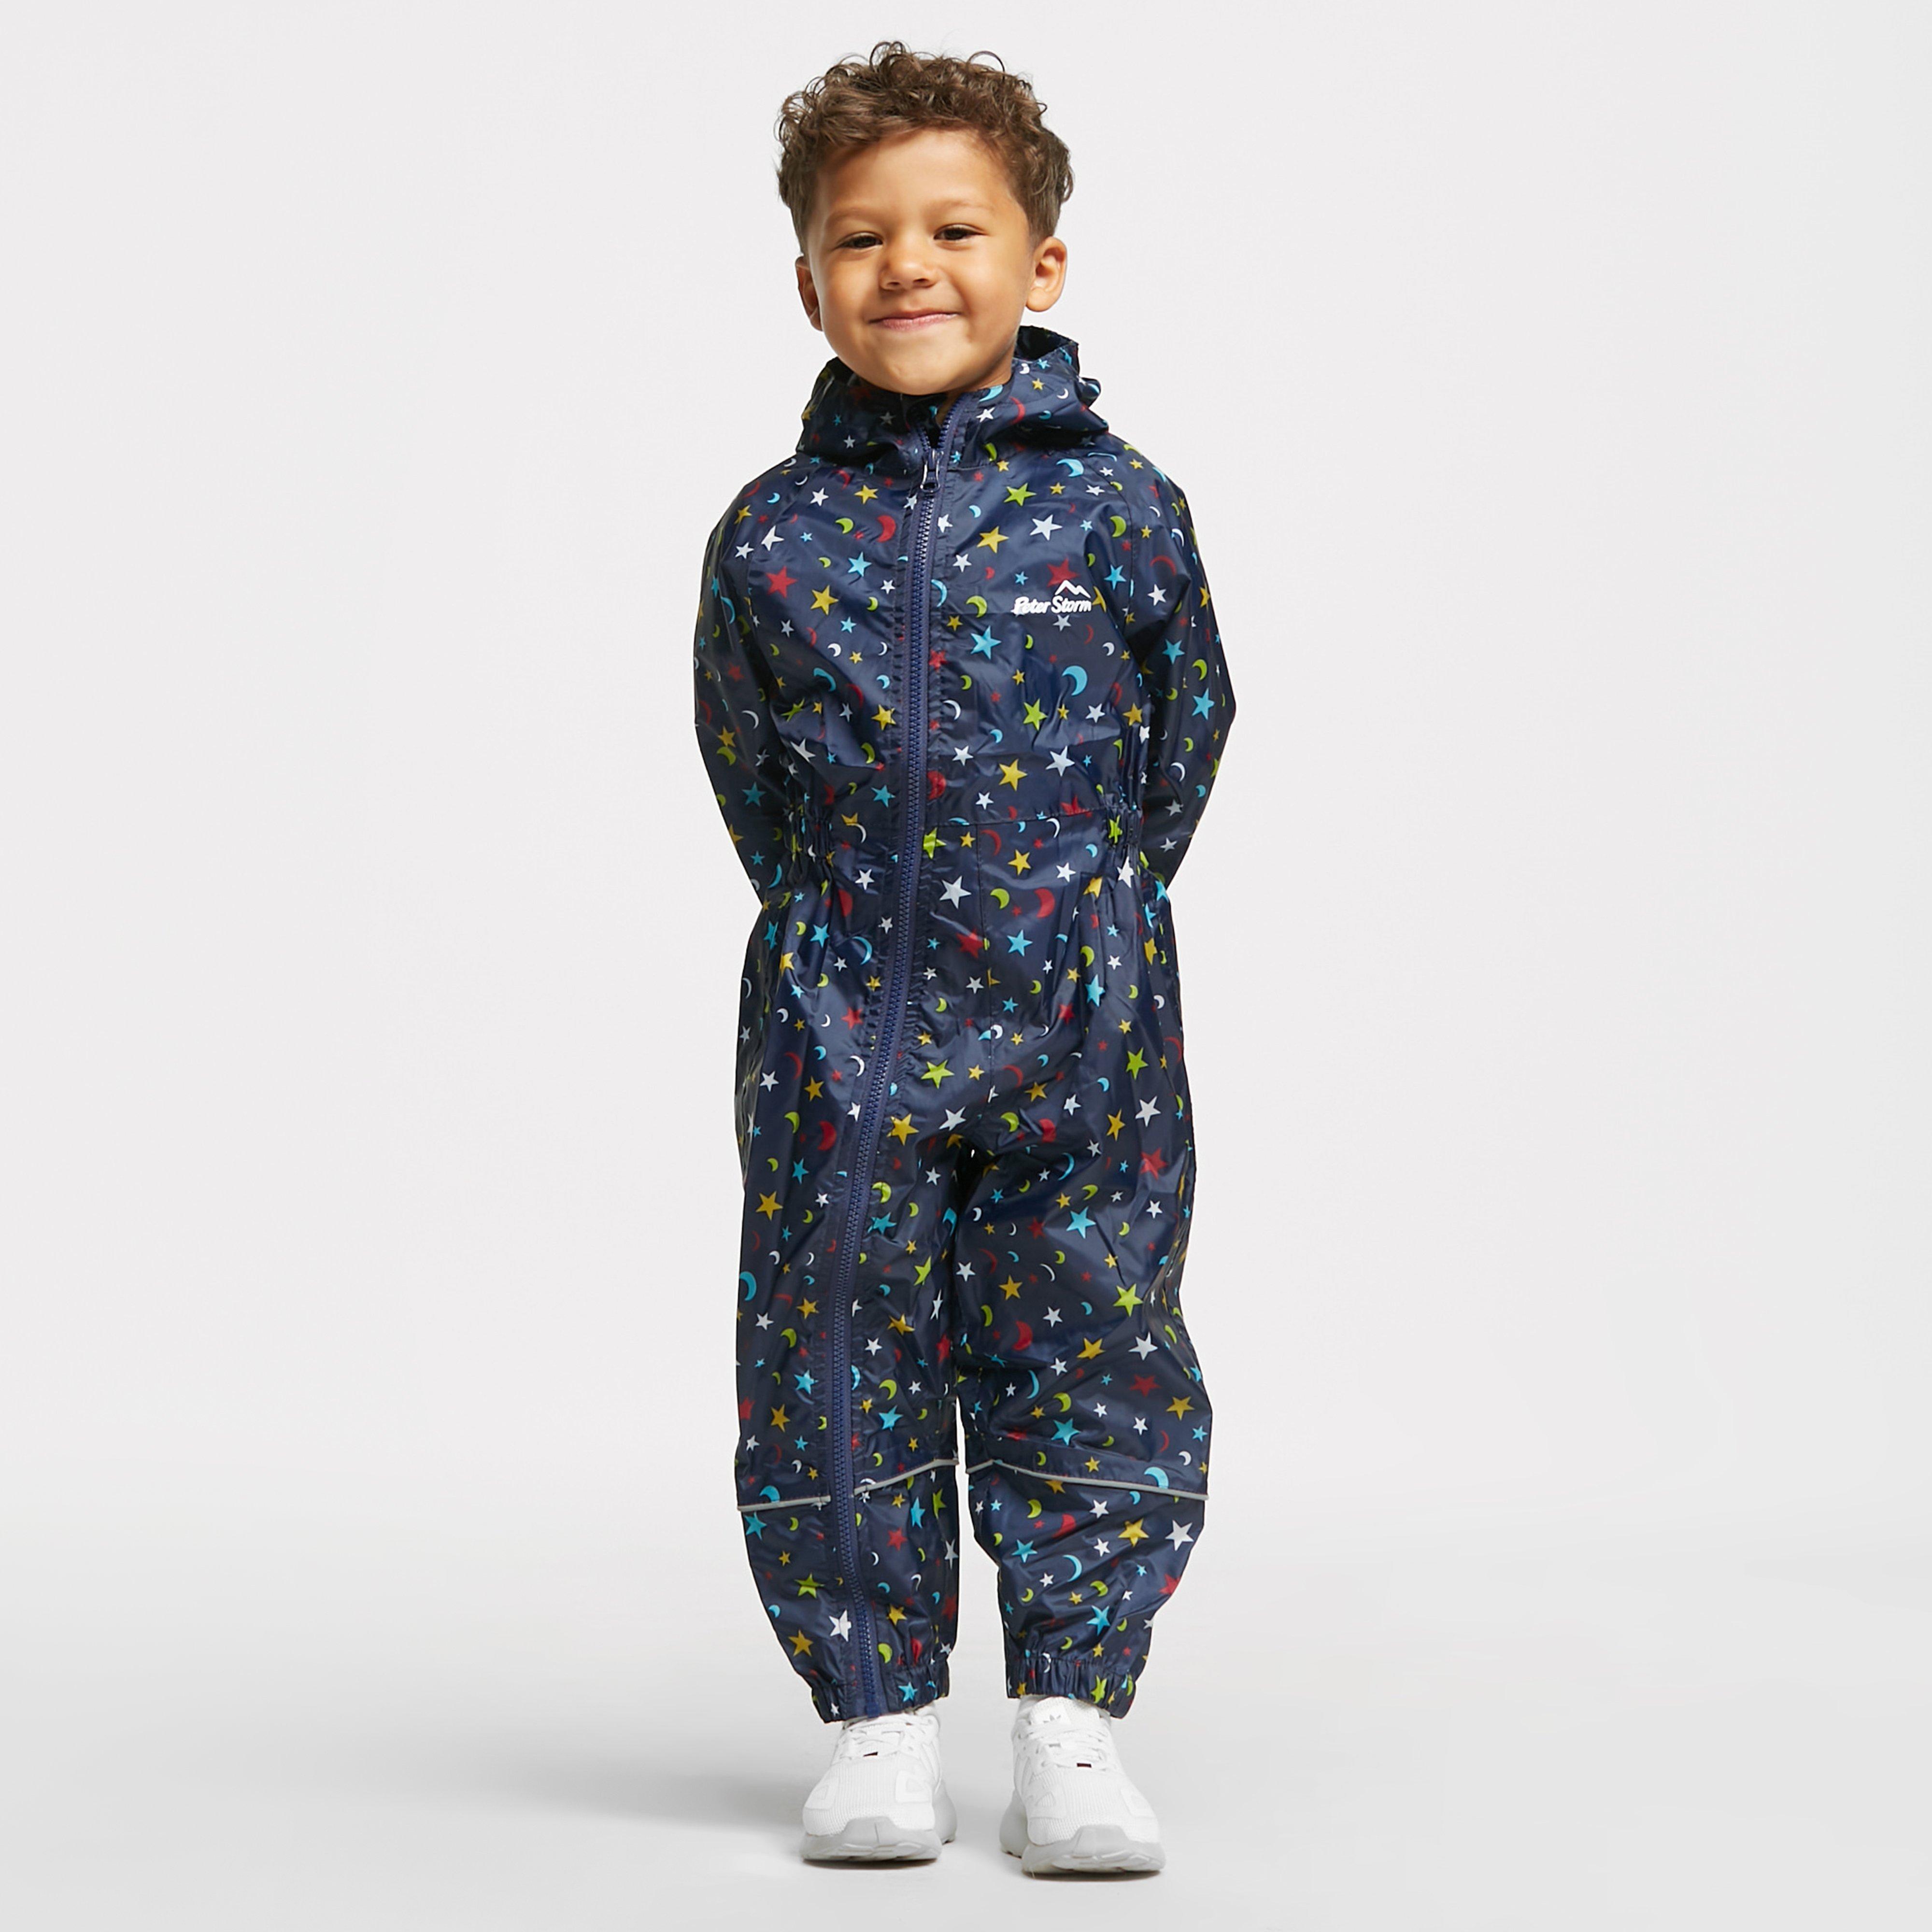 Peter Storm Kids Waterproof Suit - Navy/nvy  Navy/nvy